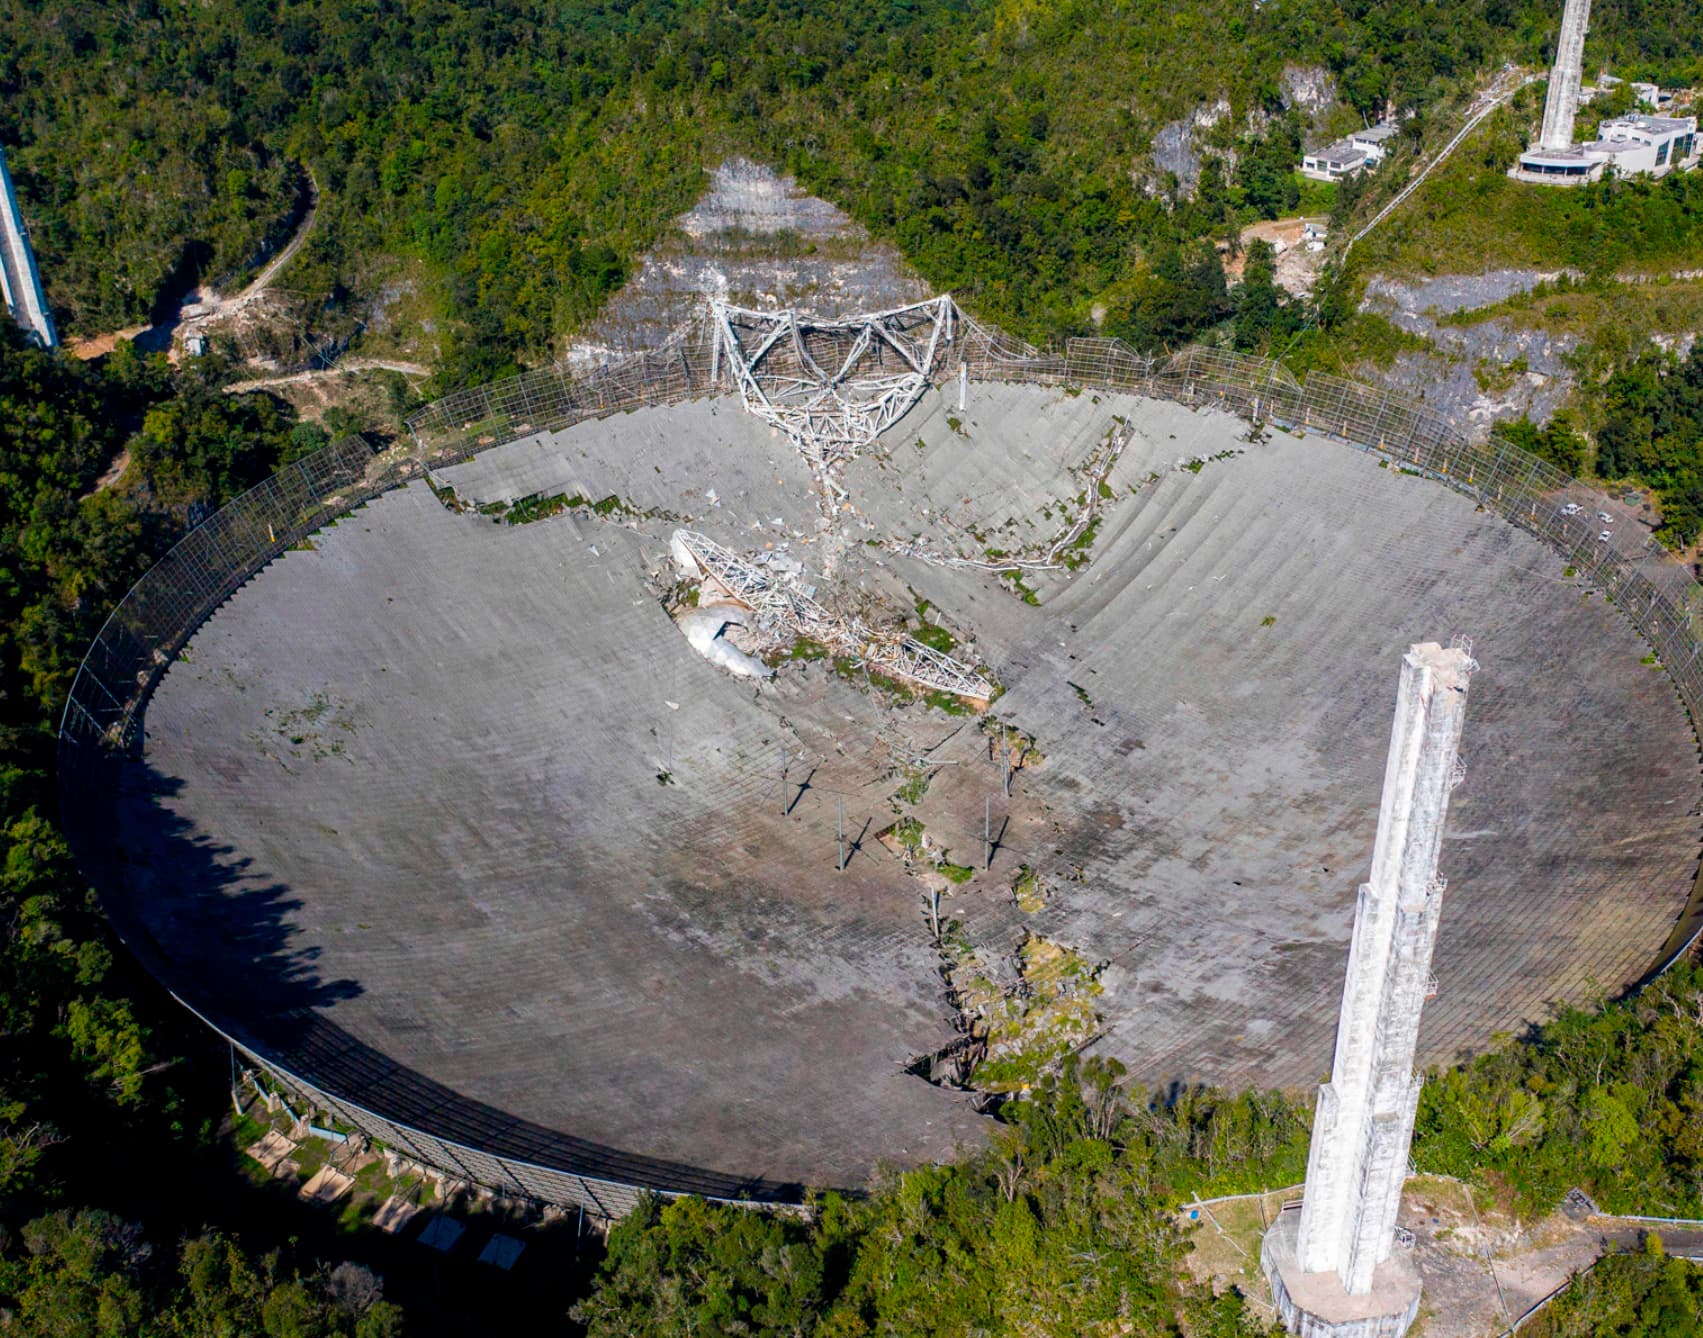 Though the Arecibo Telescope in Arecibo, Puerto Rico may have famously helped us look up at the stars, it quickly became acquainted with the ground. After weathering years of intense storms and hurricanes throughout the 2010s, the telescope collapsed on August 10, 2020 when an auxiliary cable came unlatched to a platform keeping the structure intact. 